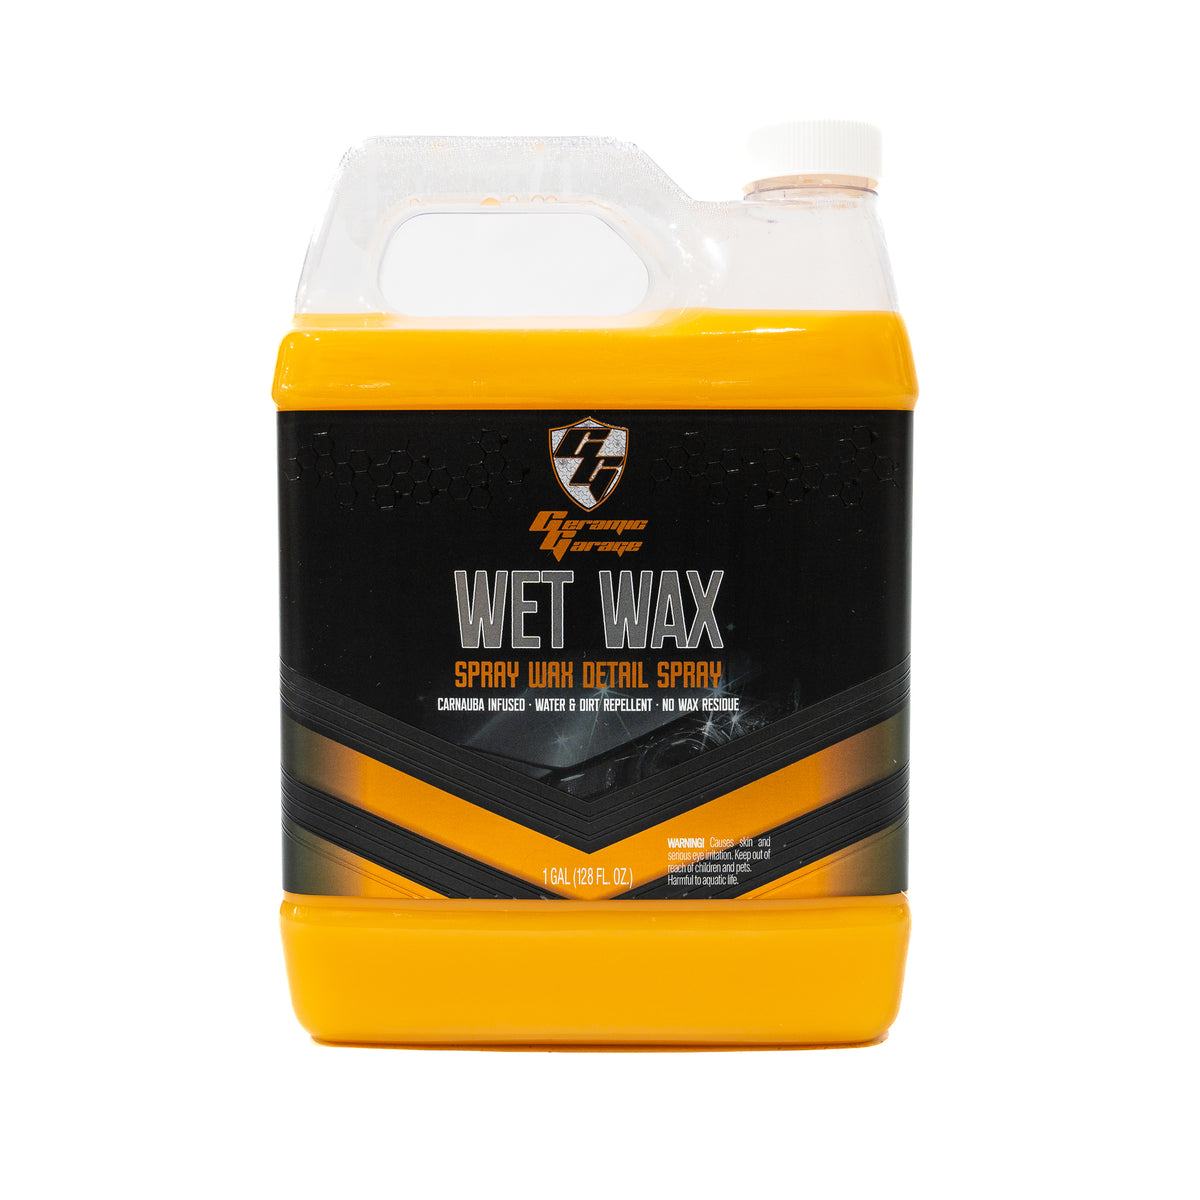 Liquid Coating Spray For Cars Repels Water And Dirt Whit Liquid